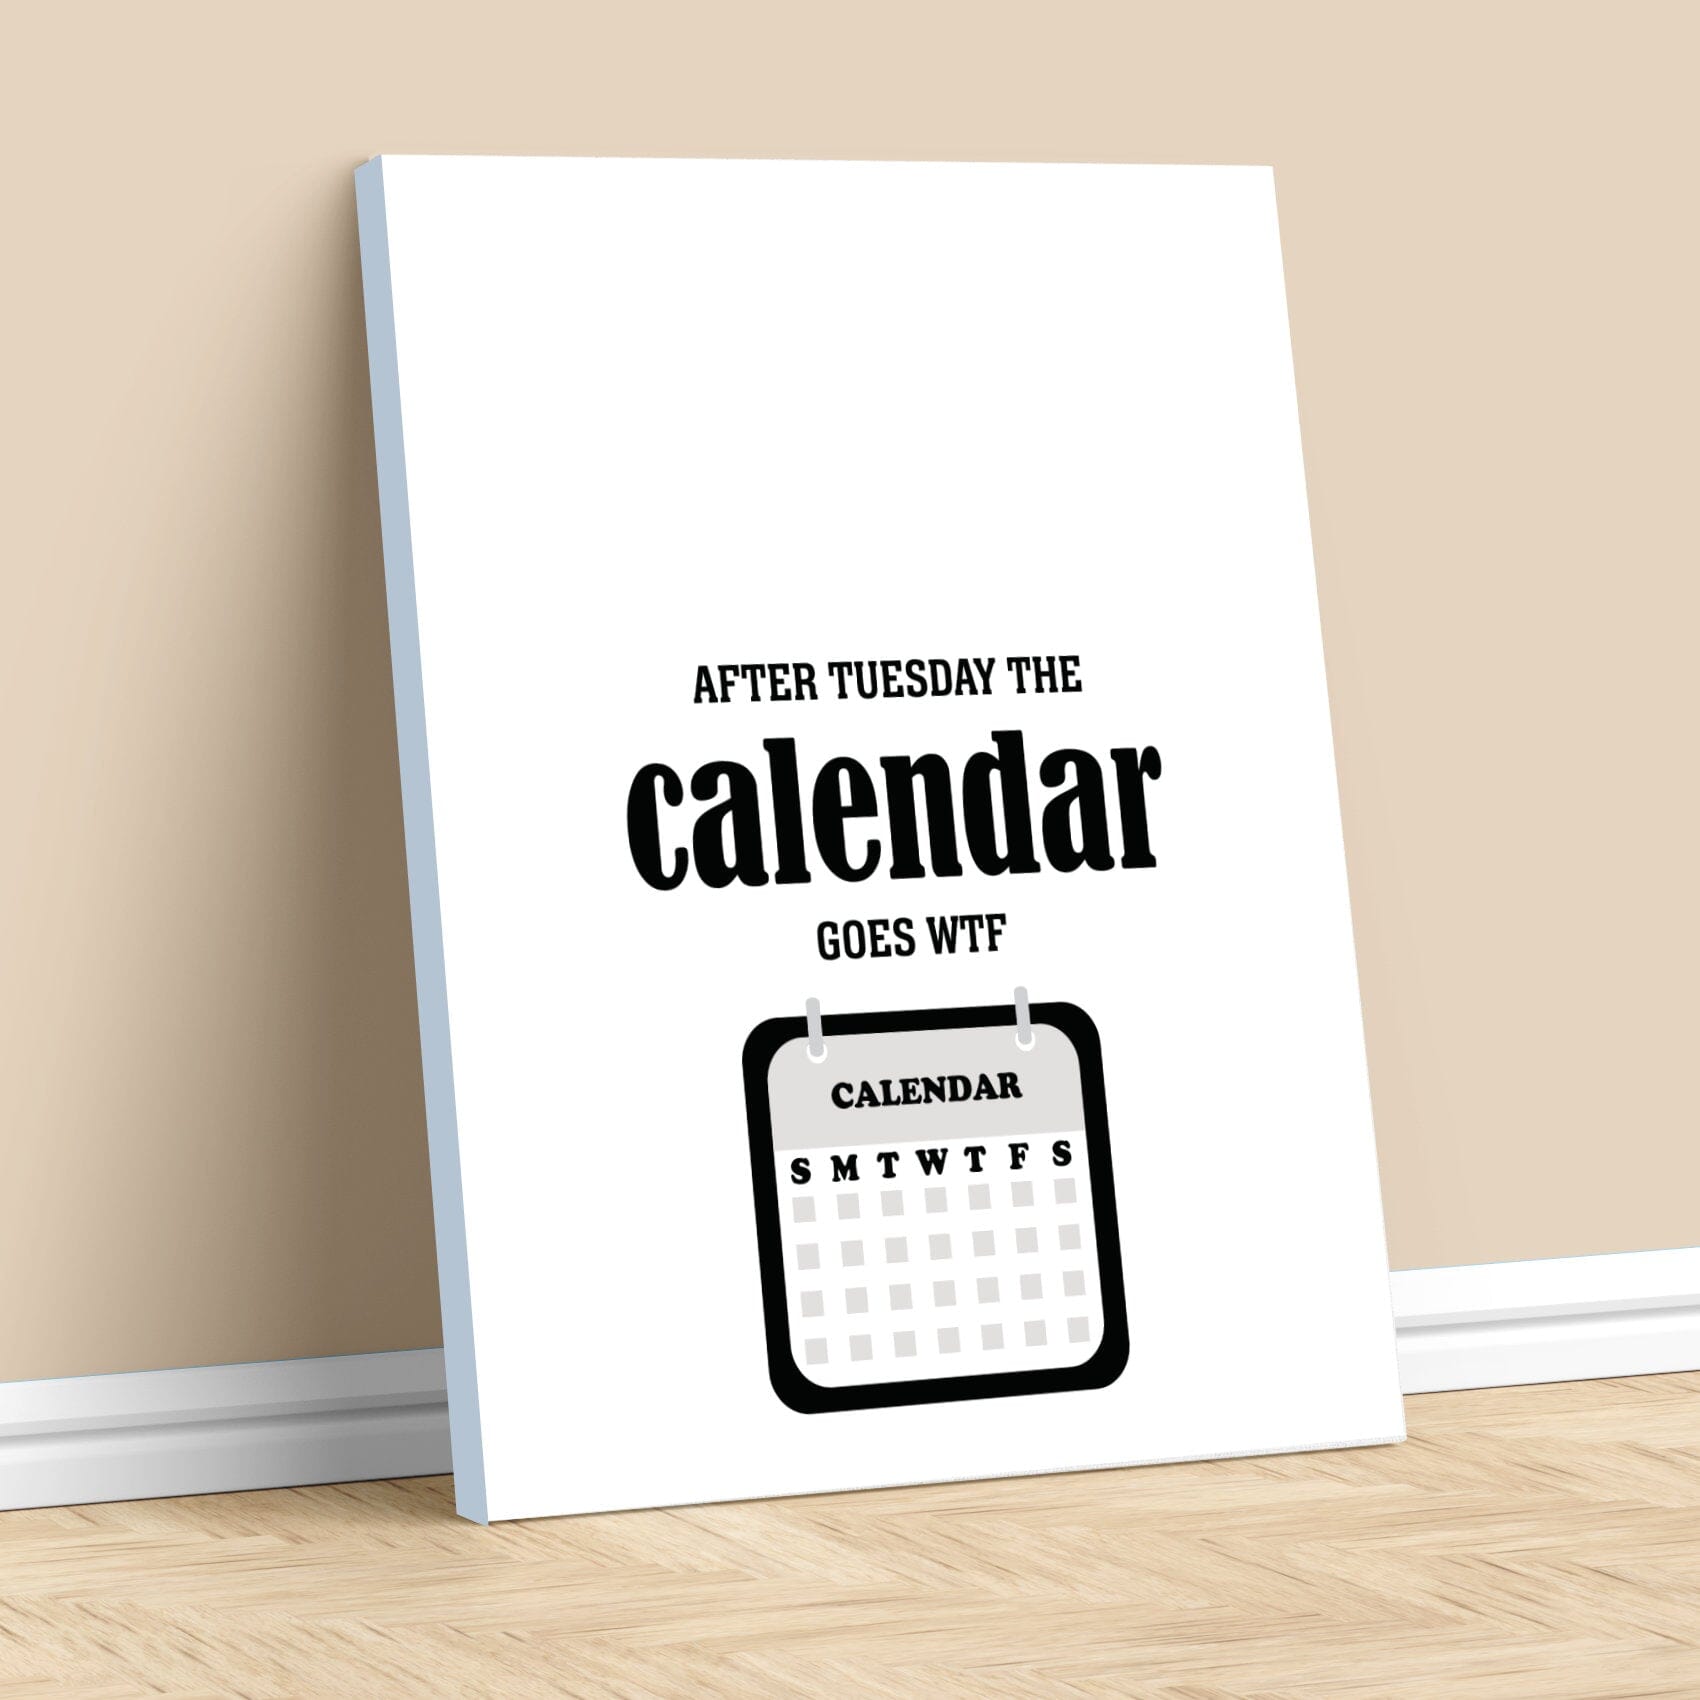 Wise and Witty Print - After Tuesday the Calendar Goes WTF Wise and Wiseass Quotes Song Lyrics Art 